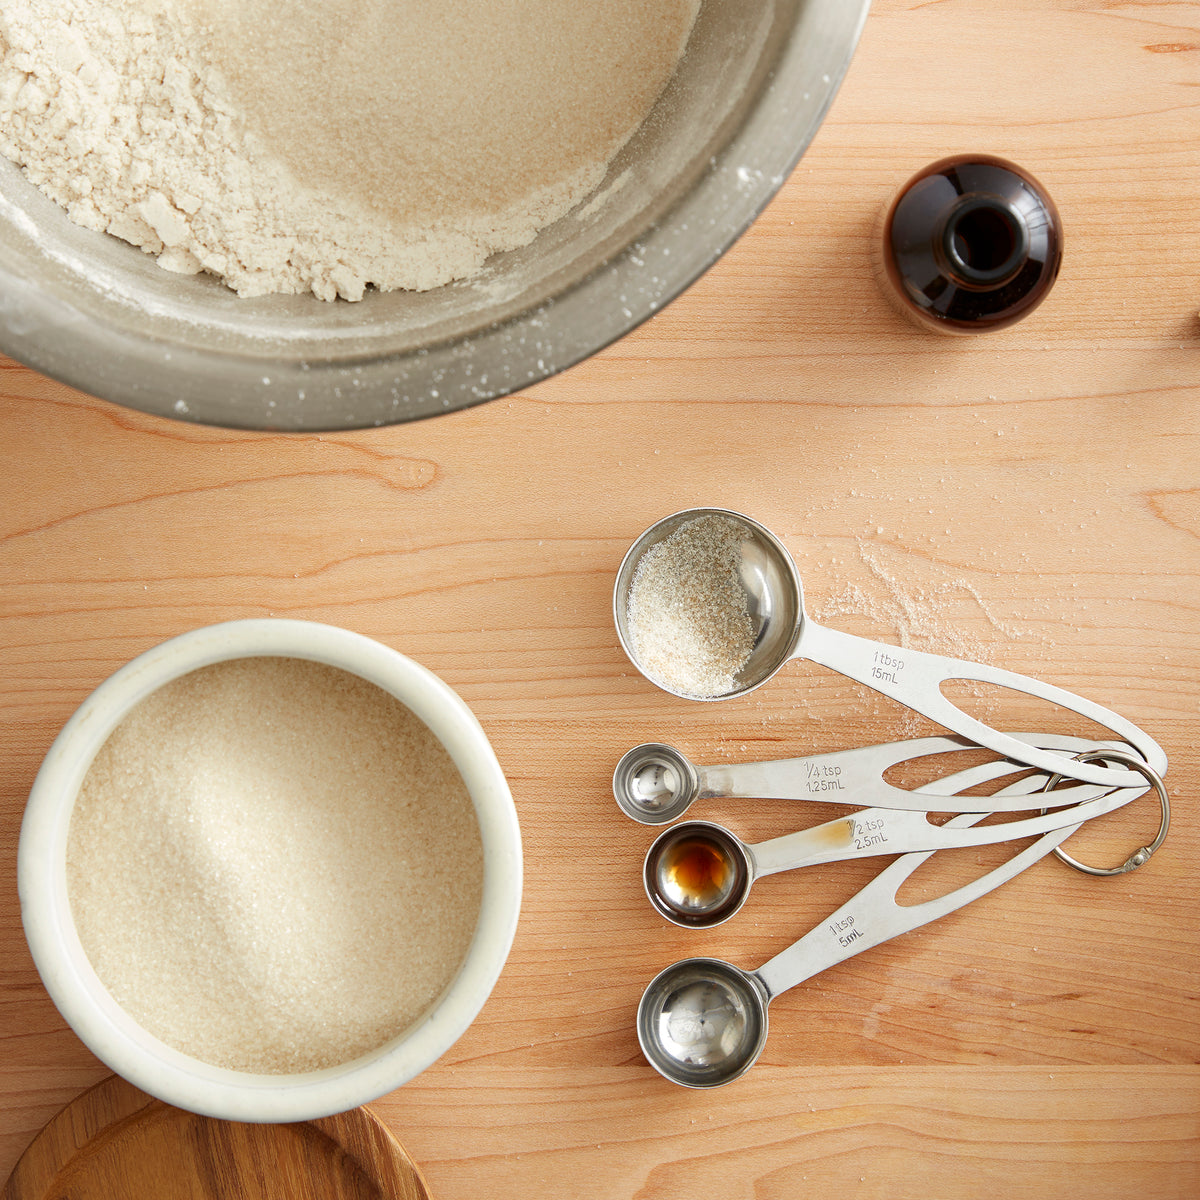 Lifestyle photo, showing a baker creating cookie dough, with the different sizes of measuring spoon showing the leftovers of flower, sugar, vanilla extract, and salt.